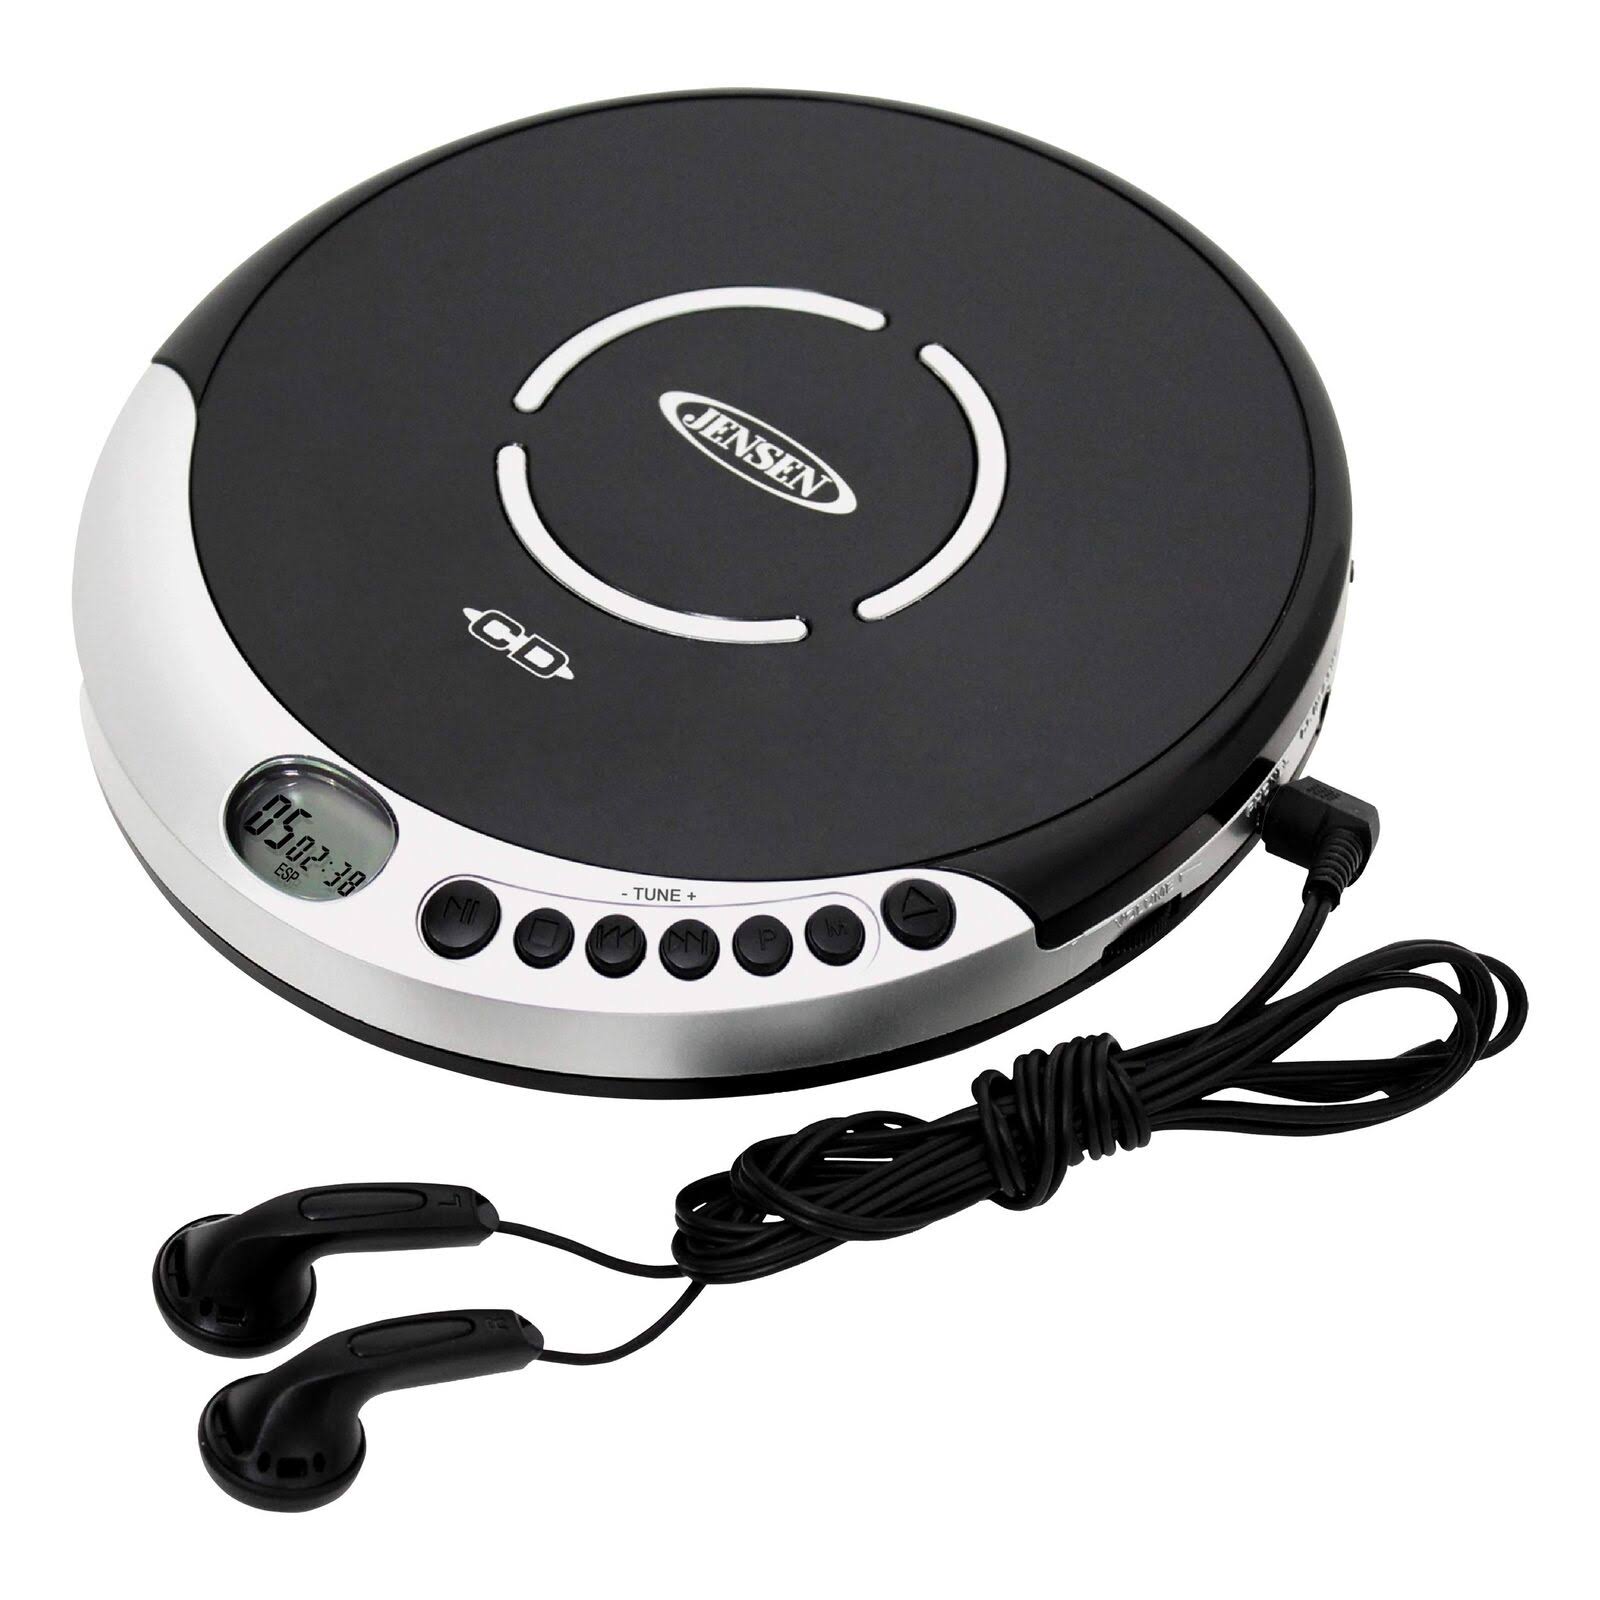 Jensen CD-60R Portable CD Player with Bass Boost